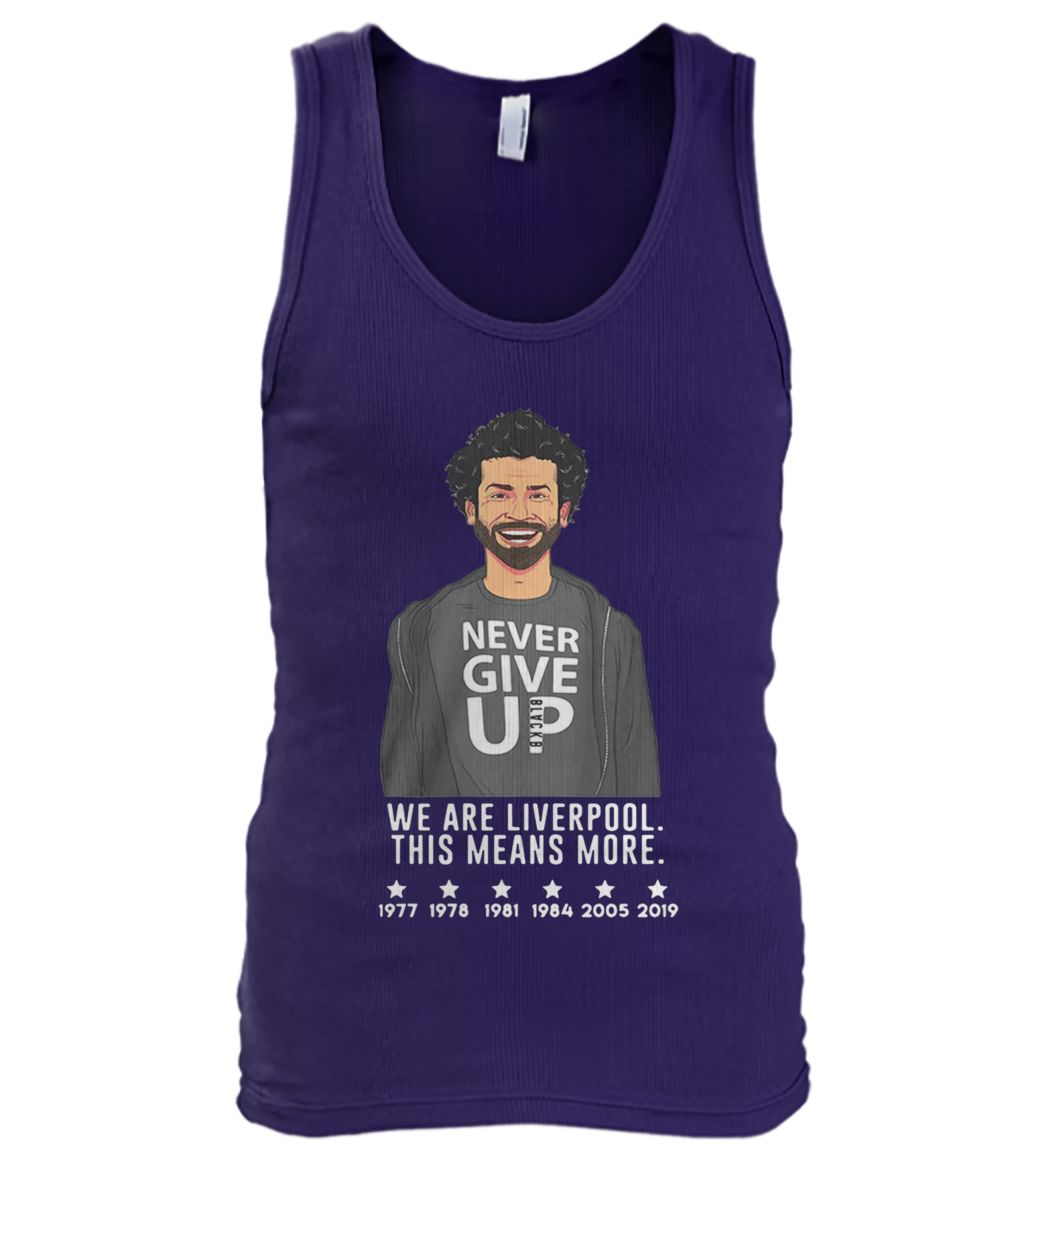 Liverpool mo salah never give up we are liverpool this means more blackb men's tank top